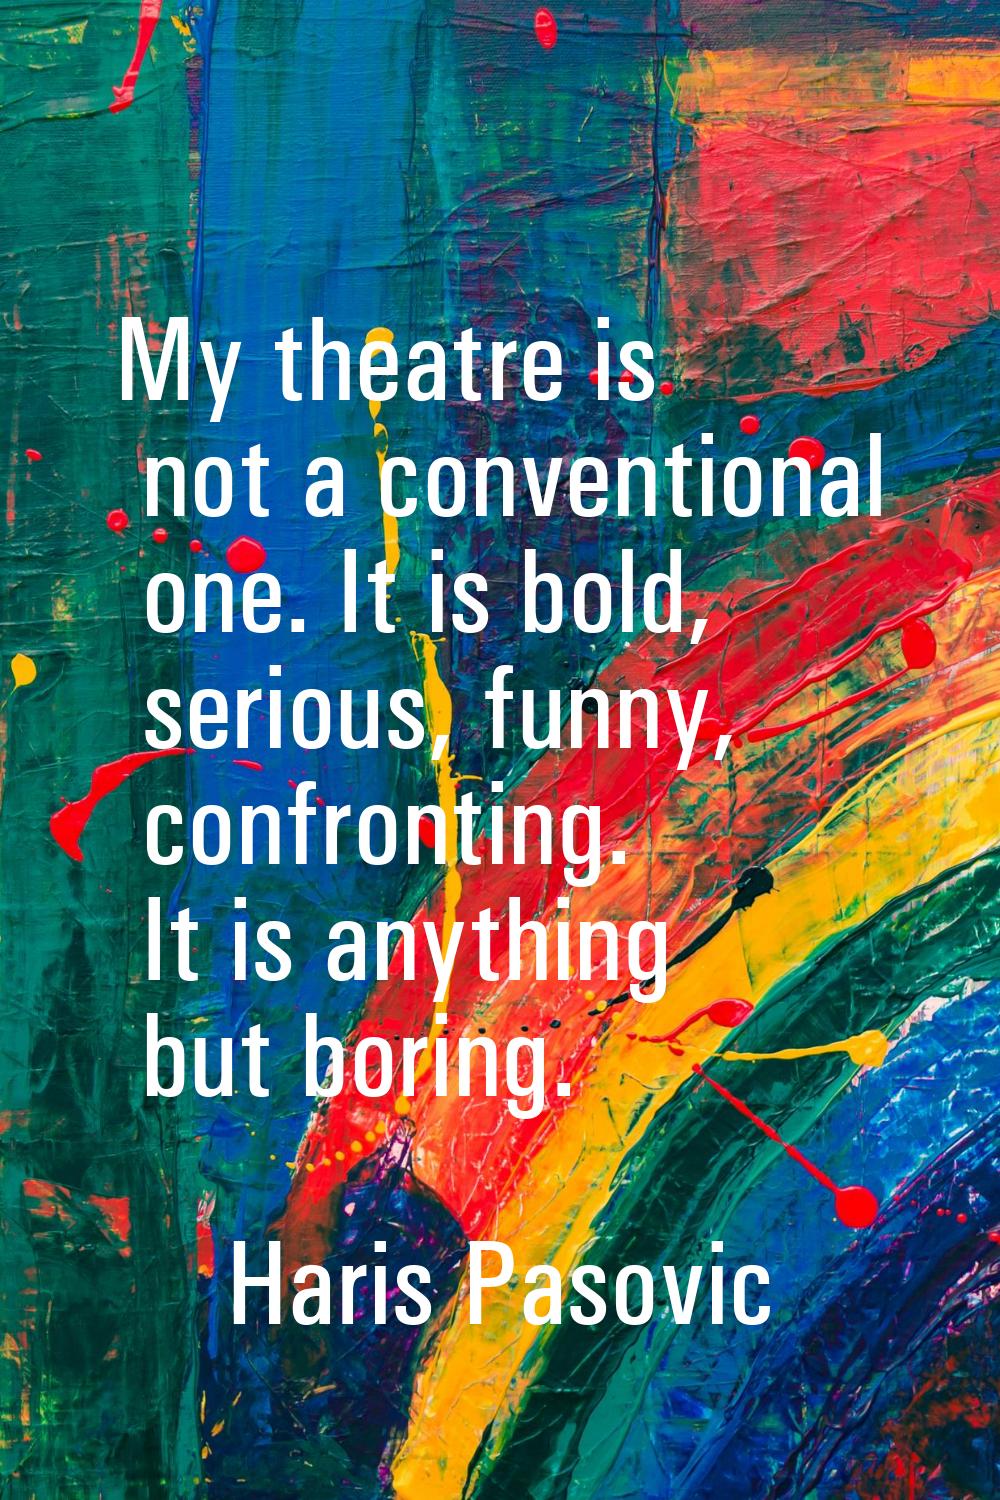 My theatre is not a conventional one. It is bold, serious, funny, confronting. It is anything but b